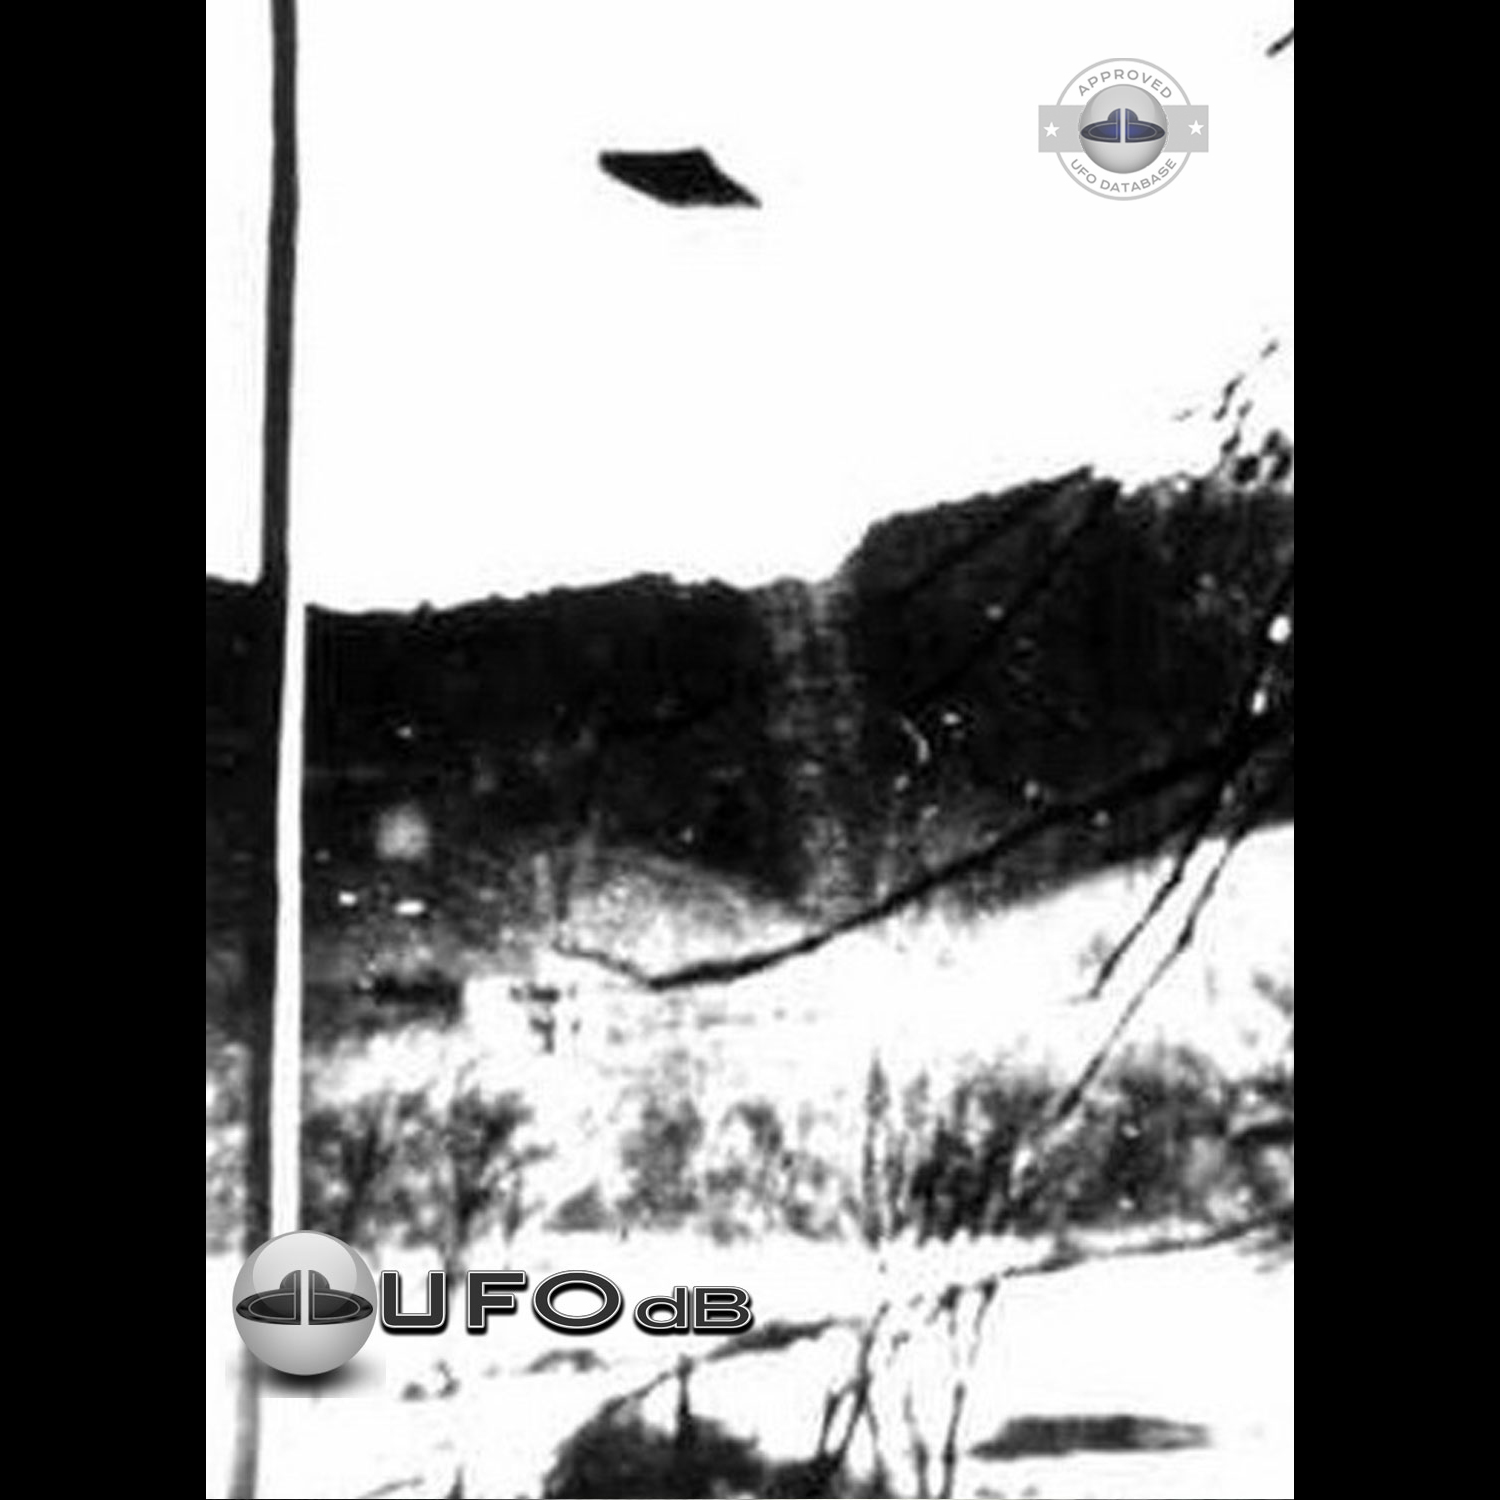 UFO seen over mountain and forest with seem to be snow on the ground UFO Picture #75-1